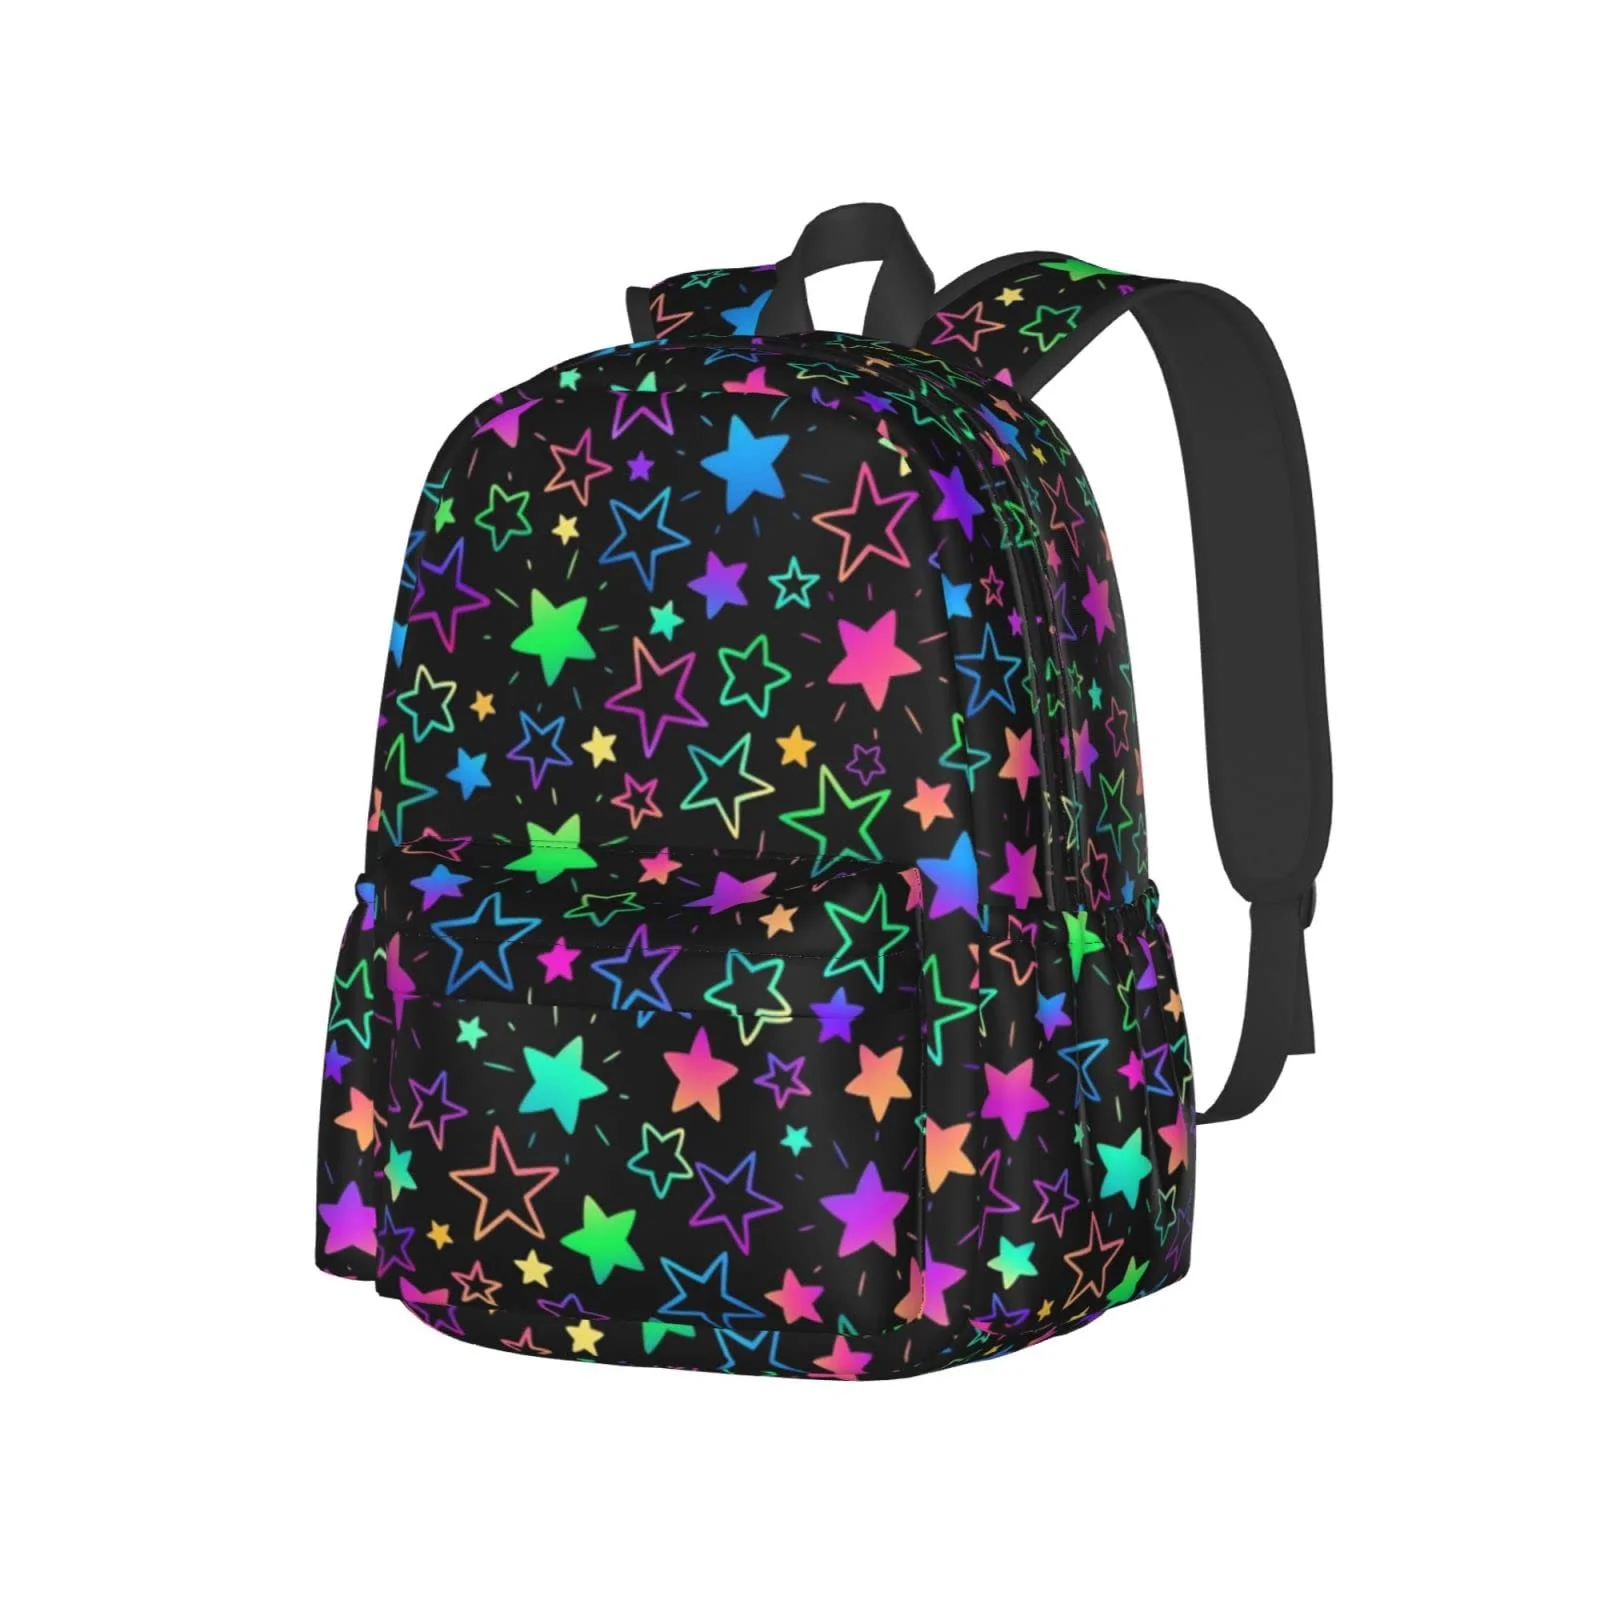 

17 Inch Laptop Backpack Bright Neon Stars for Boys Girls Children and Adult With Adjustable Bag School Bookbag Casual Daypack